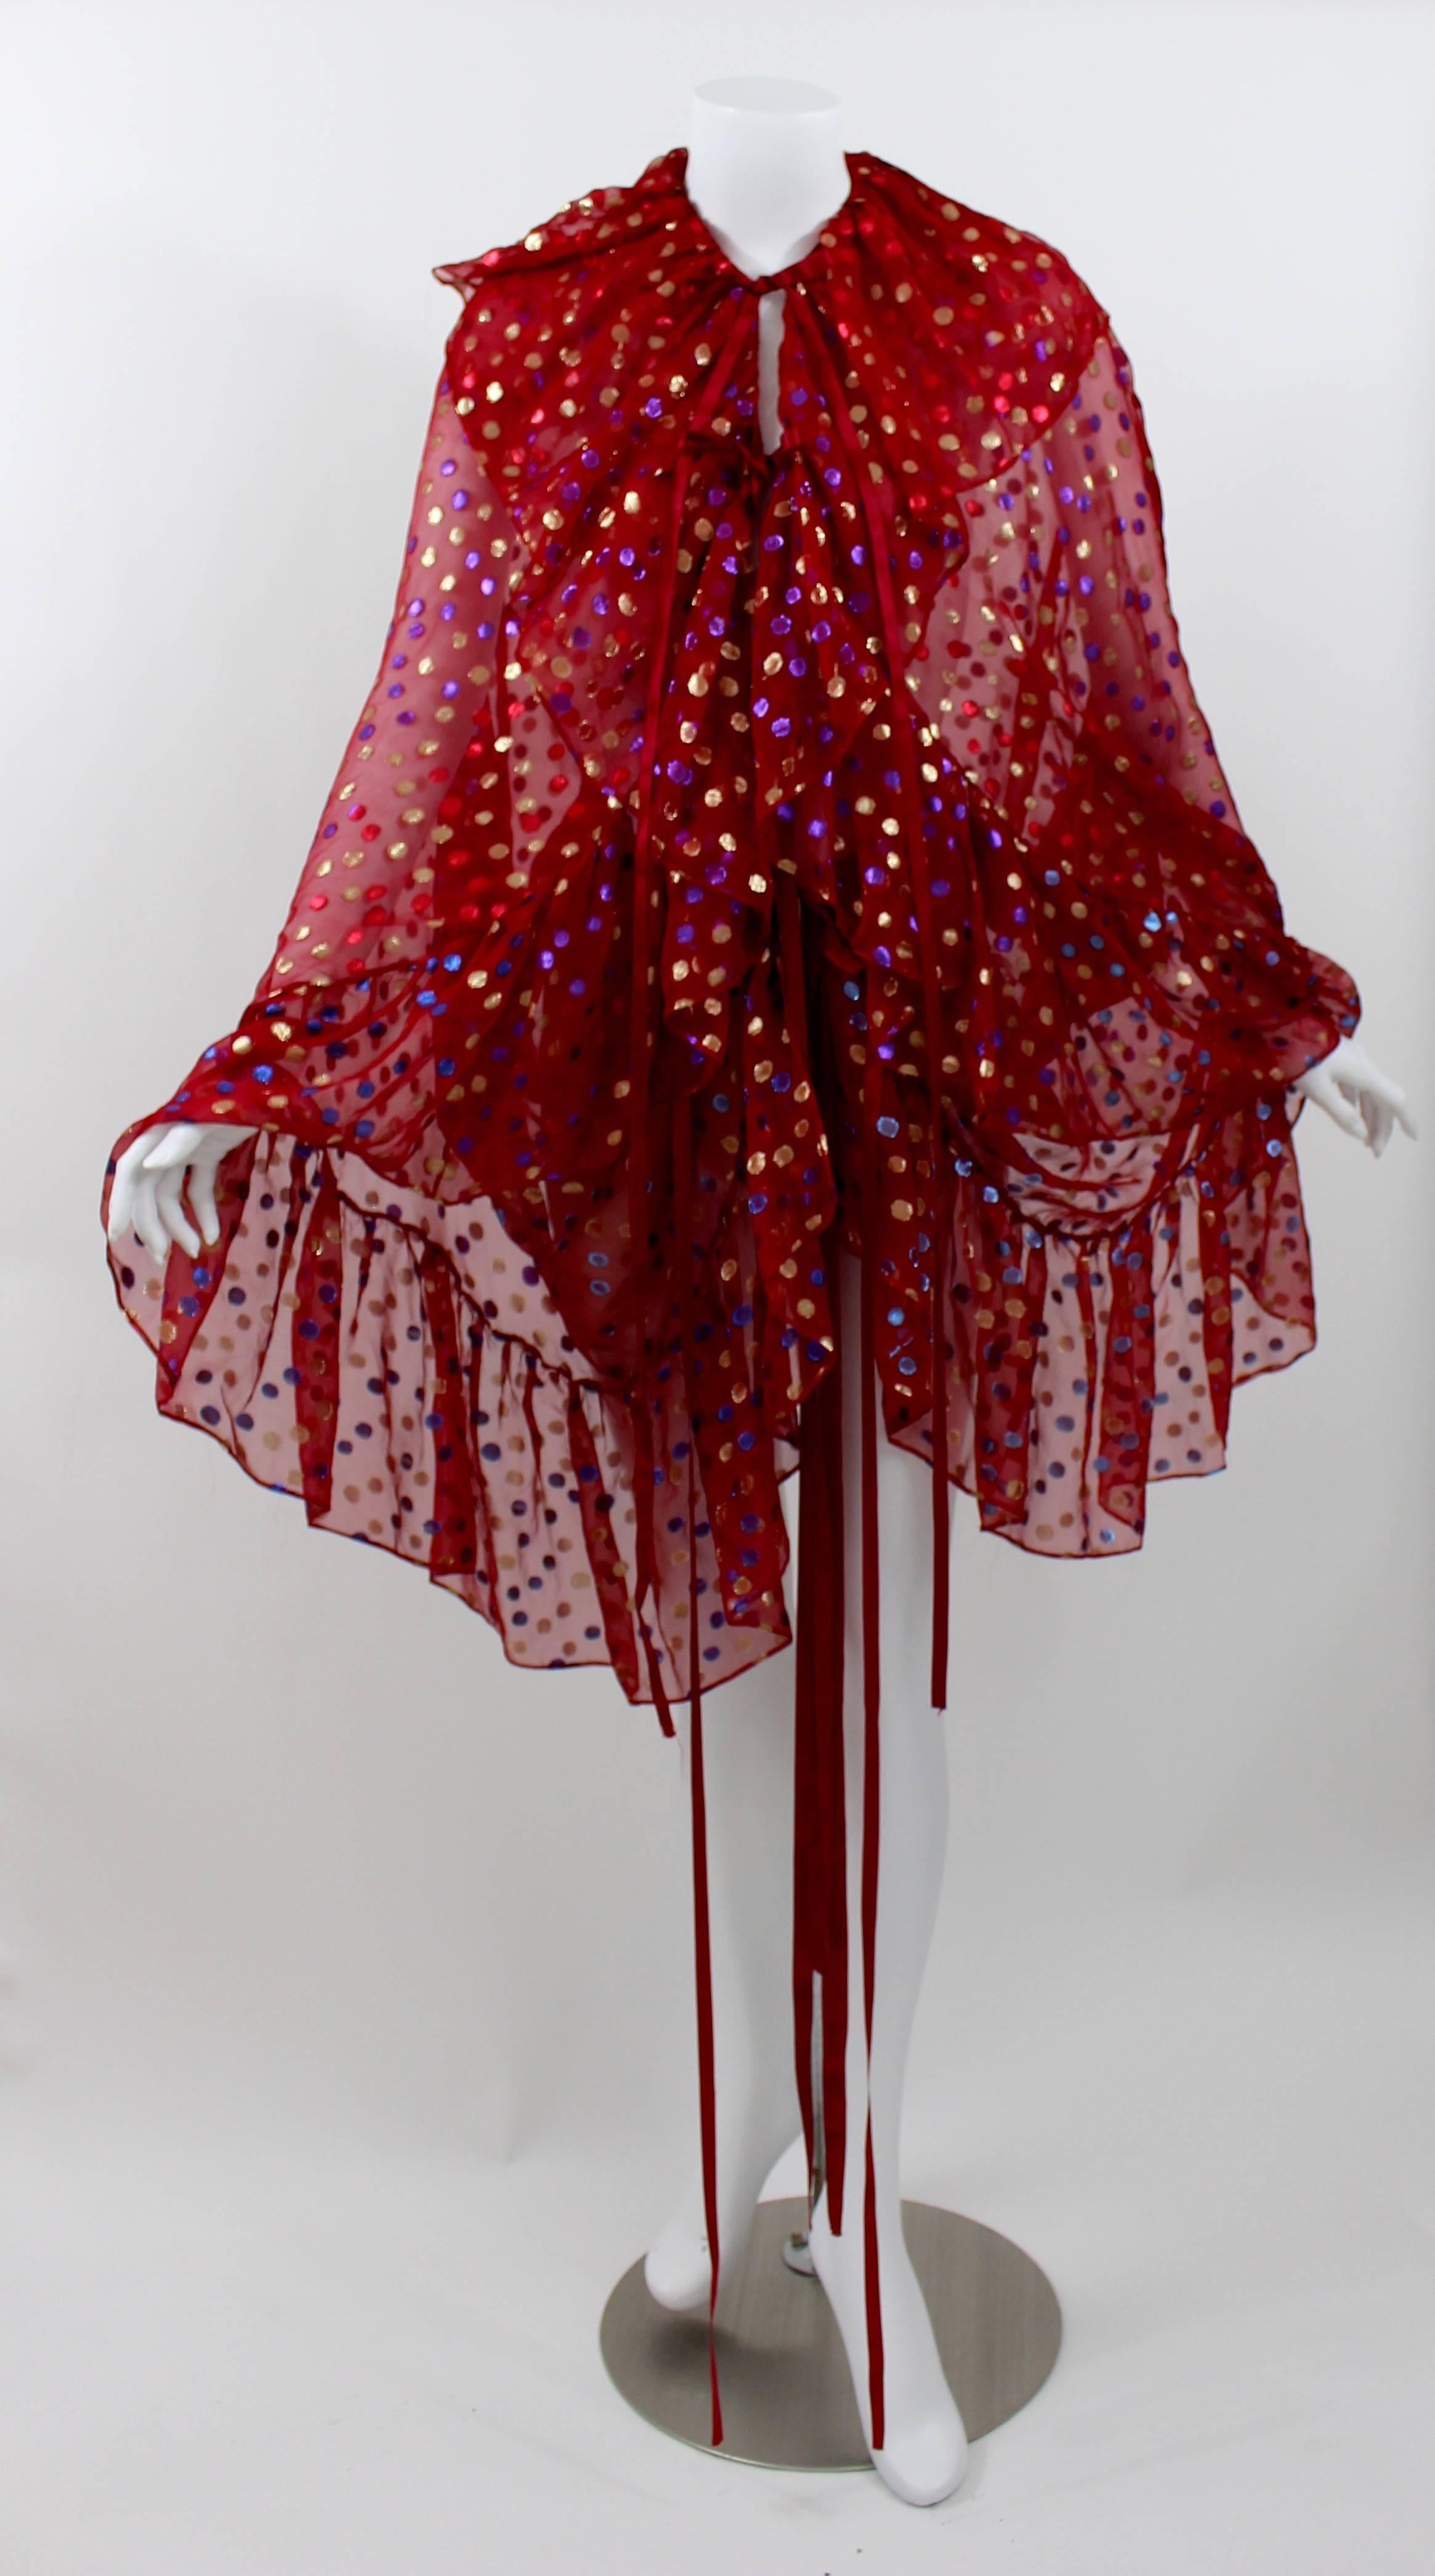 This is  a stunning vintage Saint Laurent  blouse in a glistening sheer red silk chiffon, with metallic golden, blue and purple  dots. 
Featuring a ruffle collar and cuffs.
Long red silk satin ribbons along the center of the top to tie and